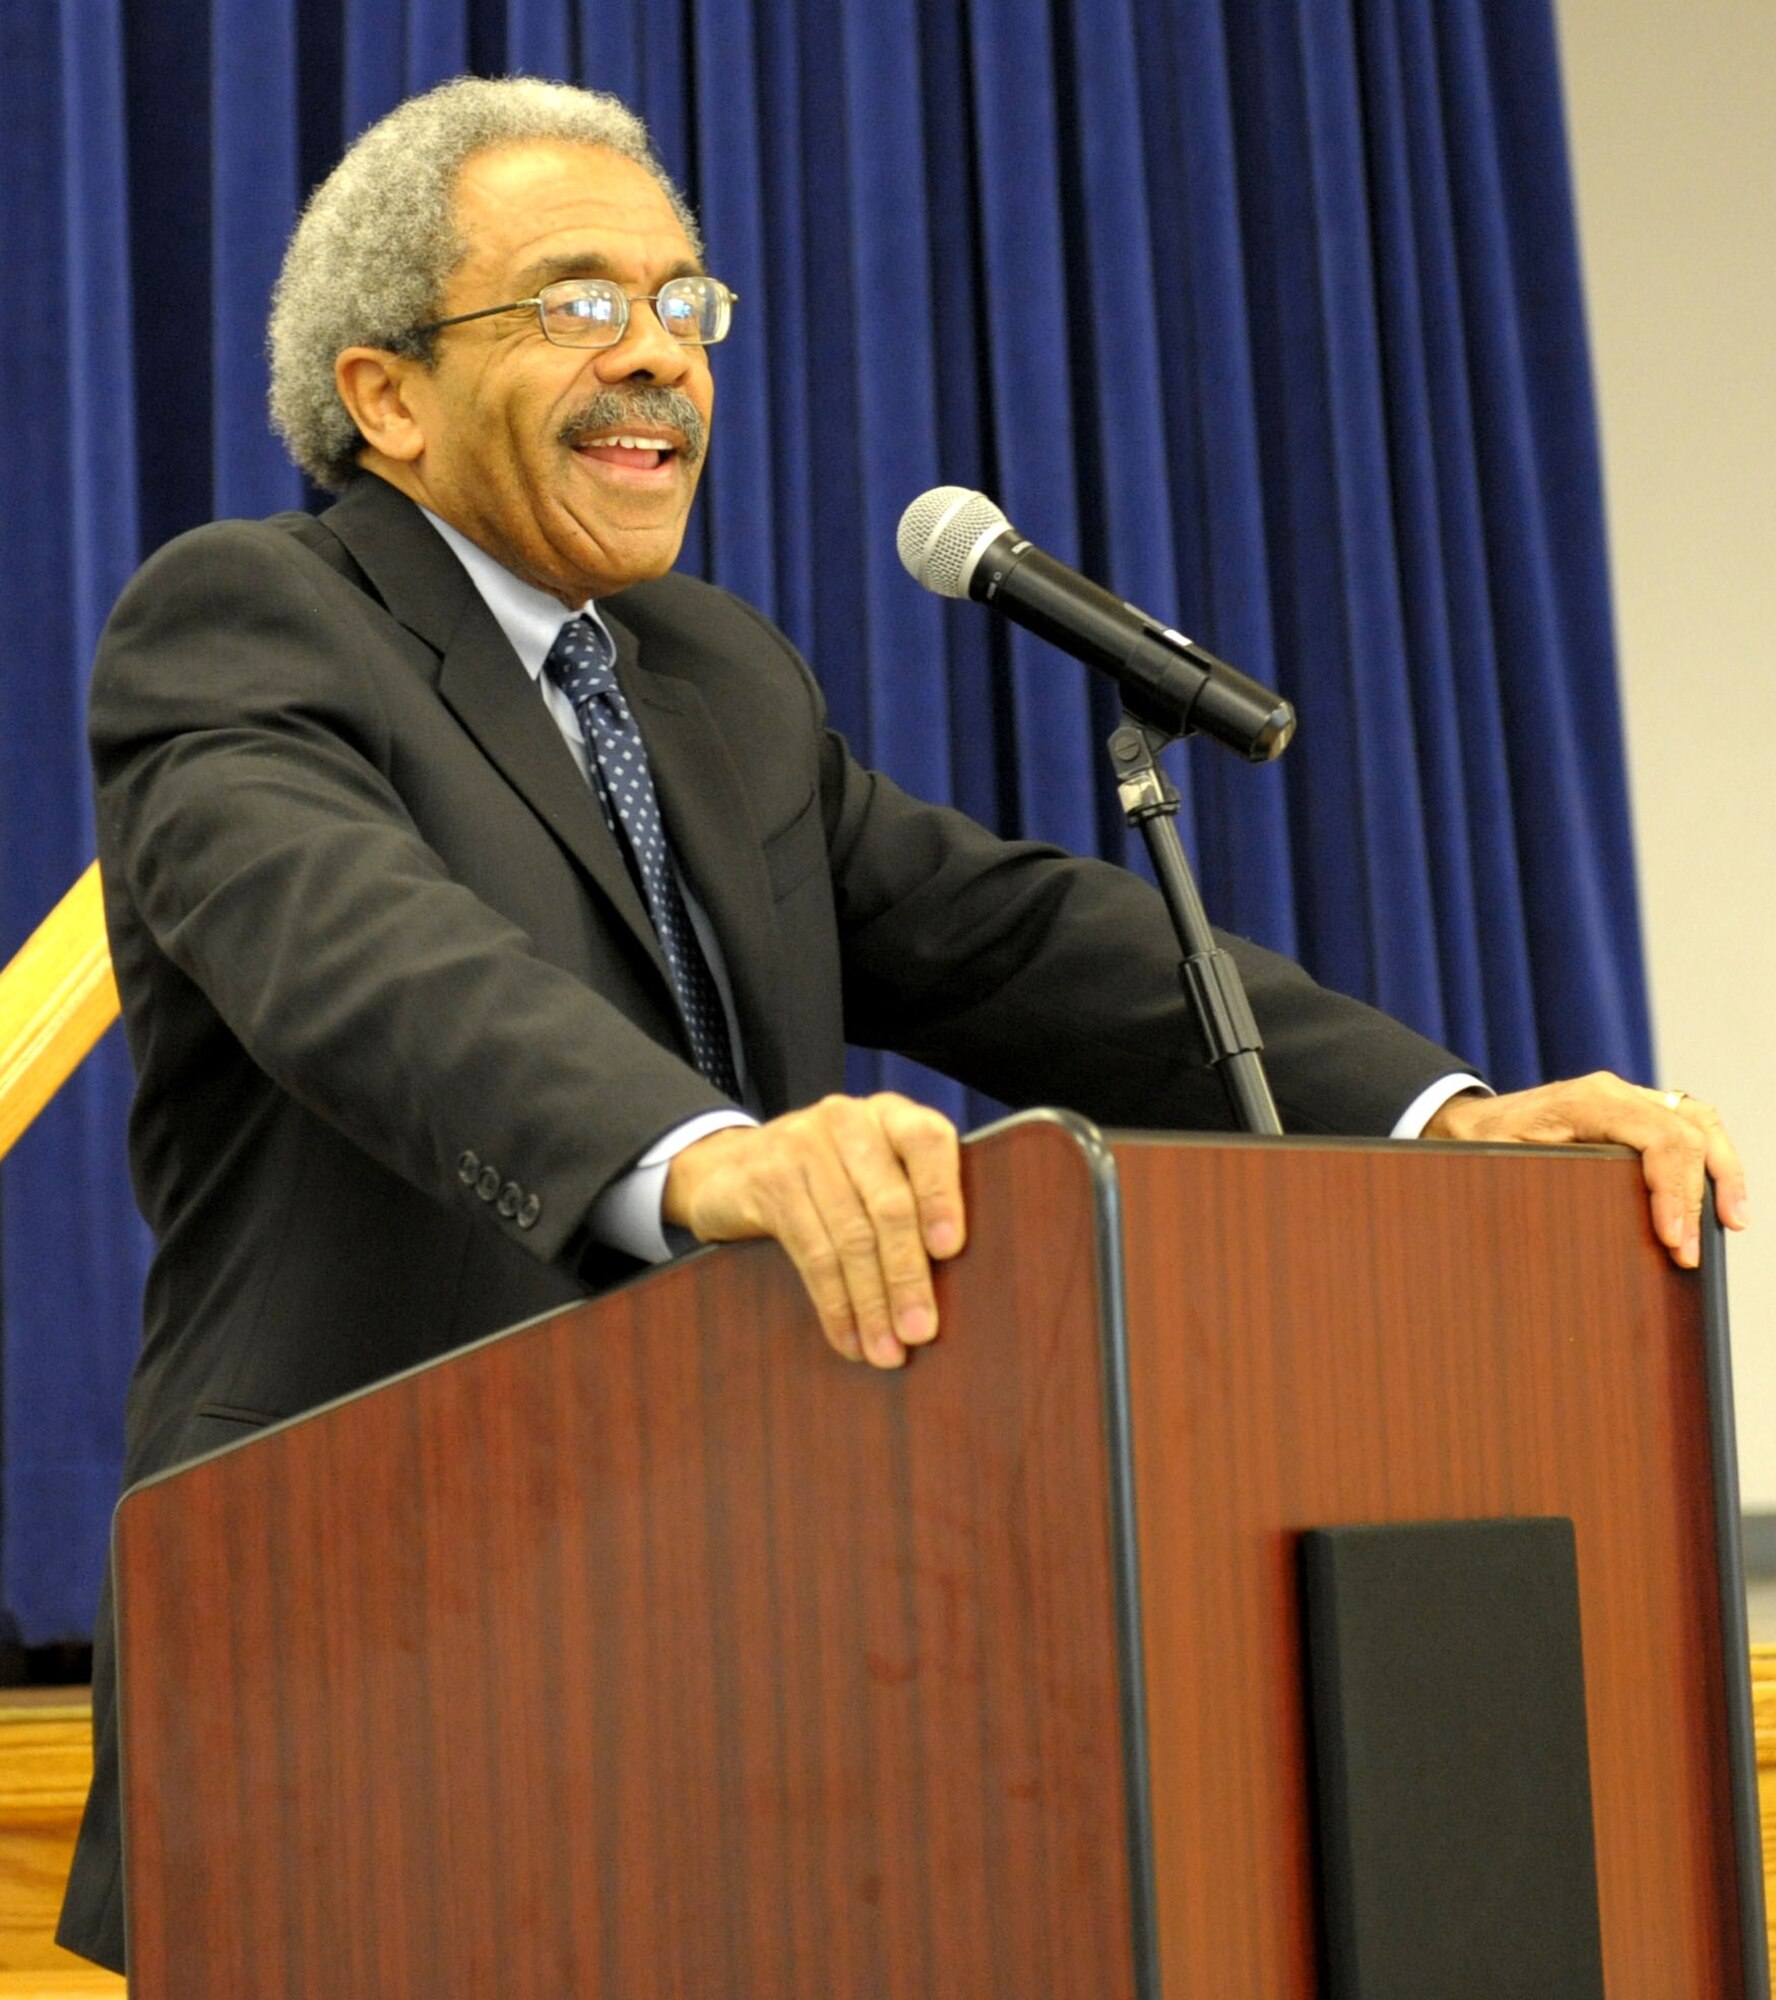 The Honorable Judge Vance Raye, speaks at the 2011 African-American, Black History Month luncheon Feb. 24 at the Recce Point Club. Judge Raye’s message focused on the trials and hardships suffered by African-Americans not only during the Civil War, but throughout history.